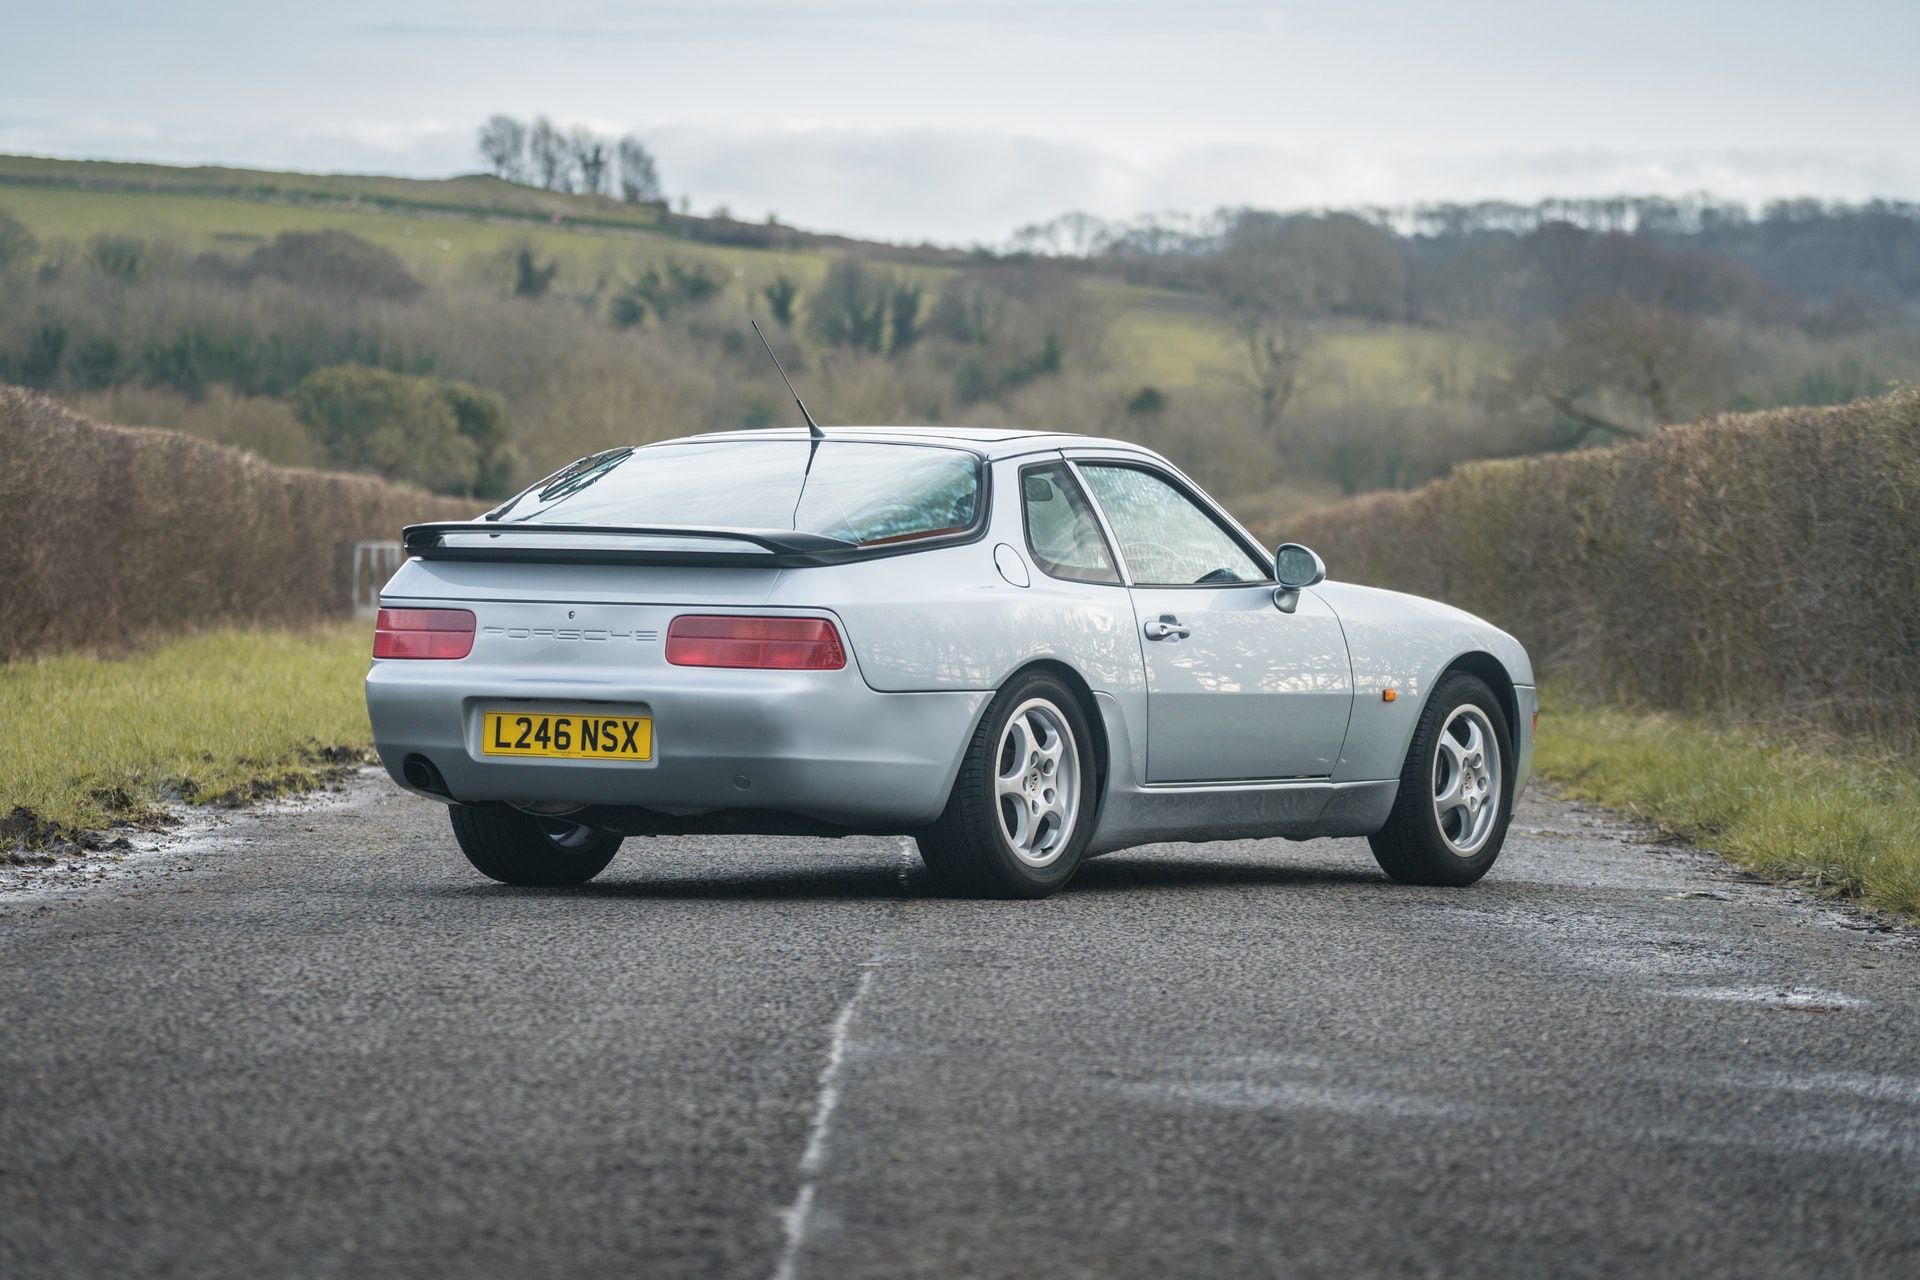 Underrated Nineties Sports Cars